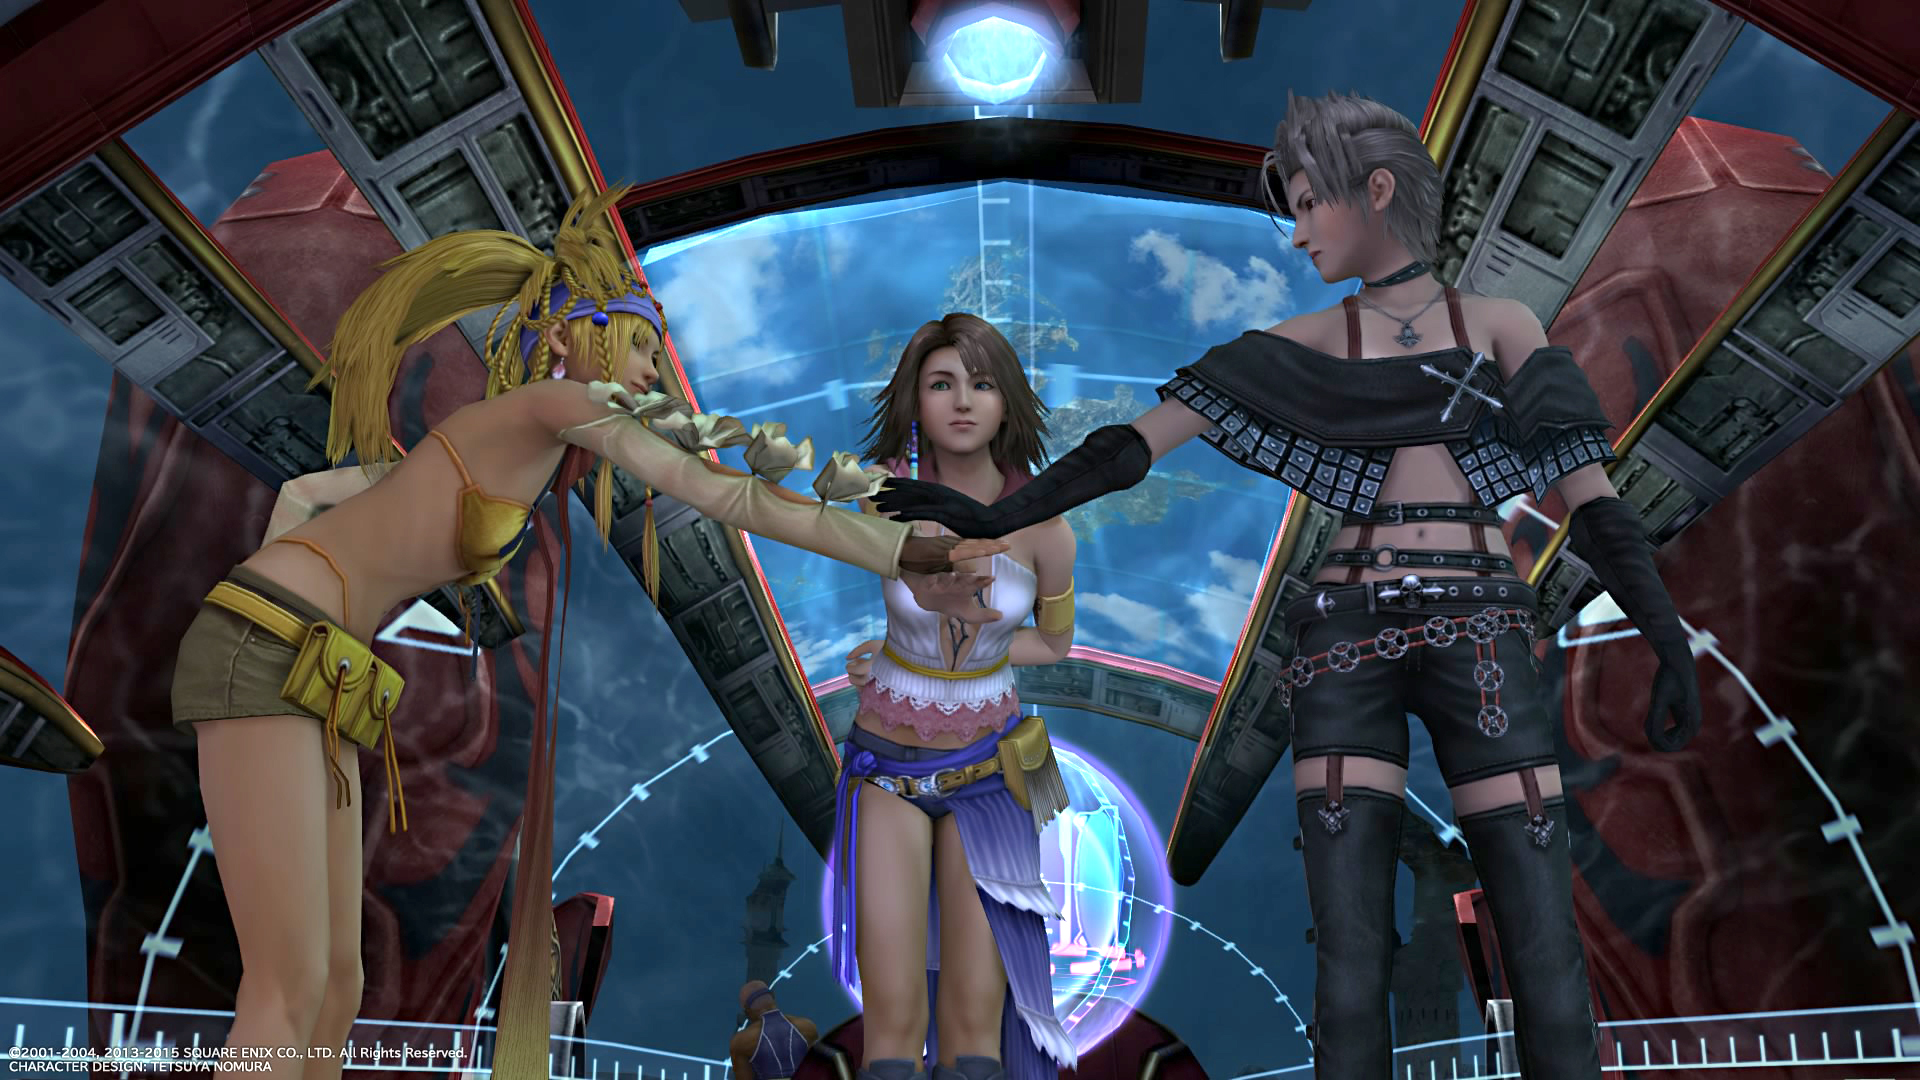 Save 60% on FINAL FANTASY X/X-2 HD Remaster on Steam